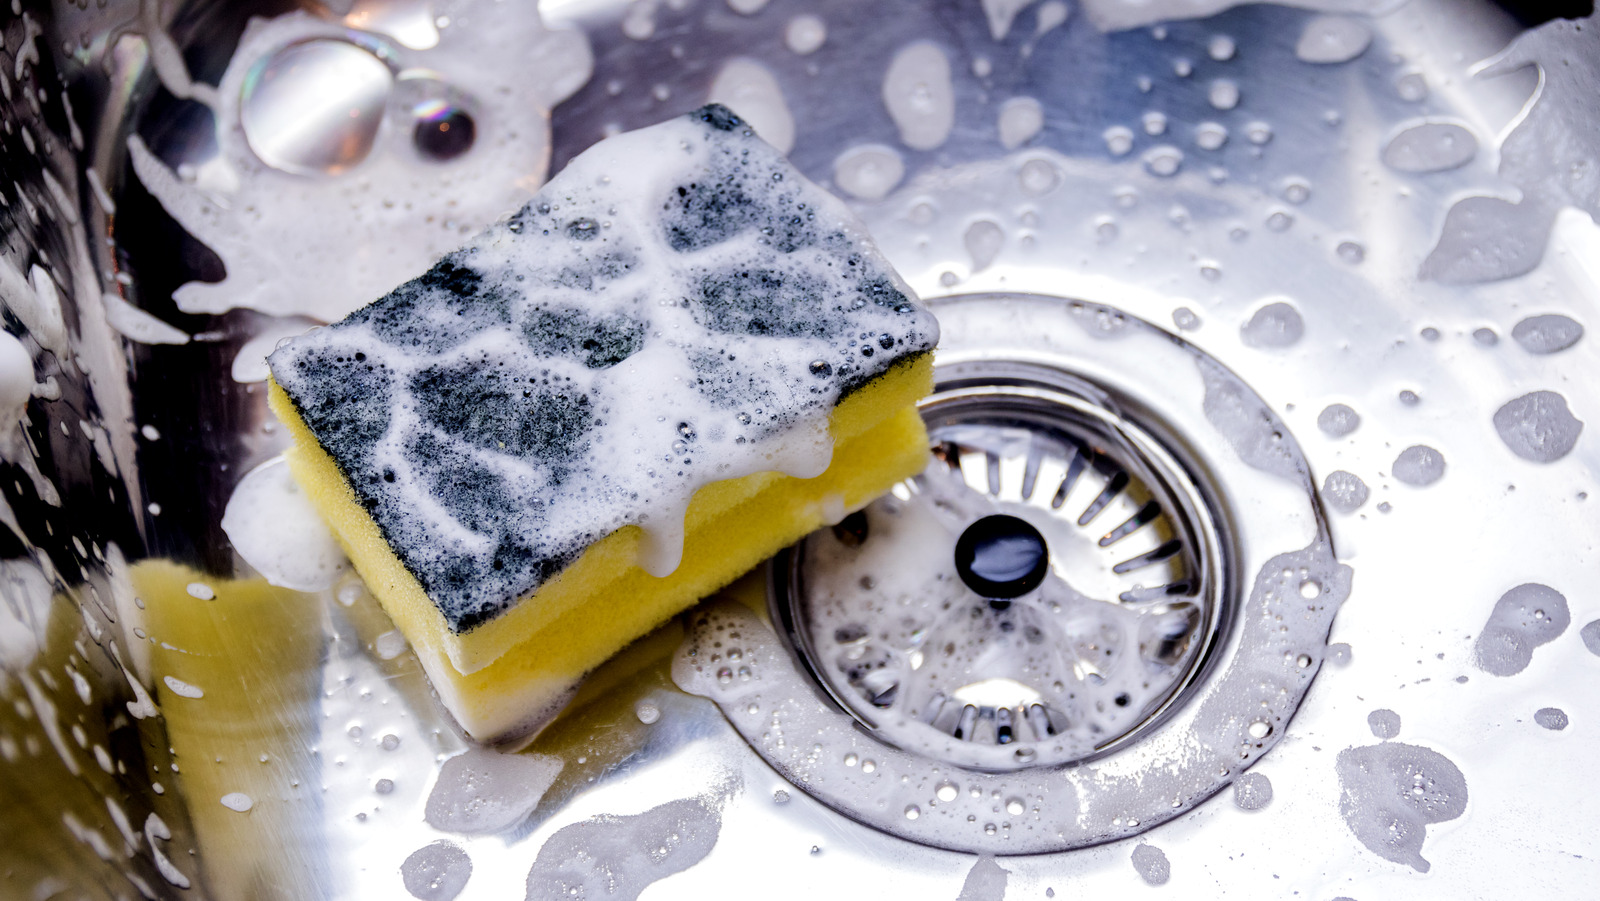 How to Keep a Kitchen Sponge From Smelling